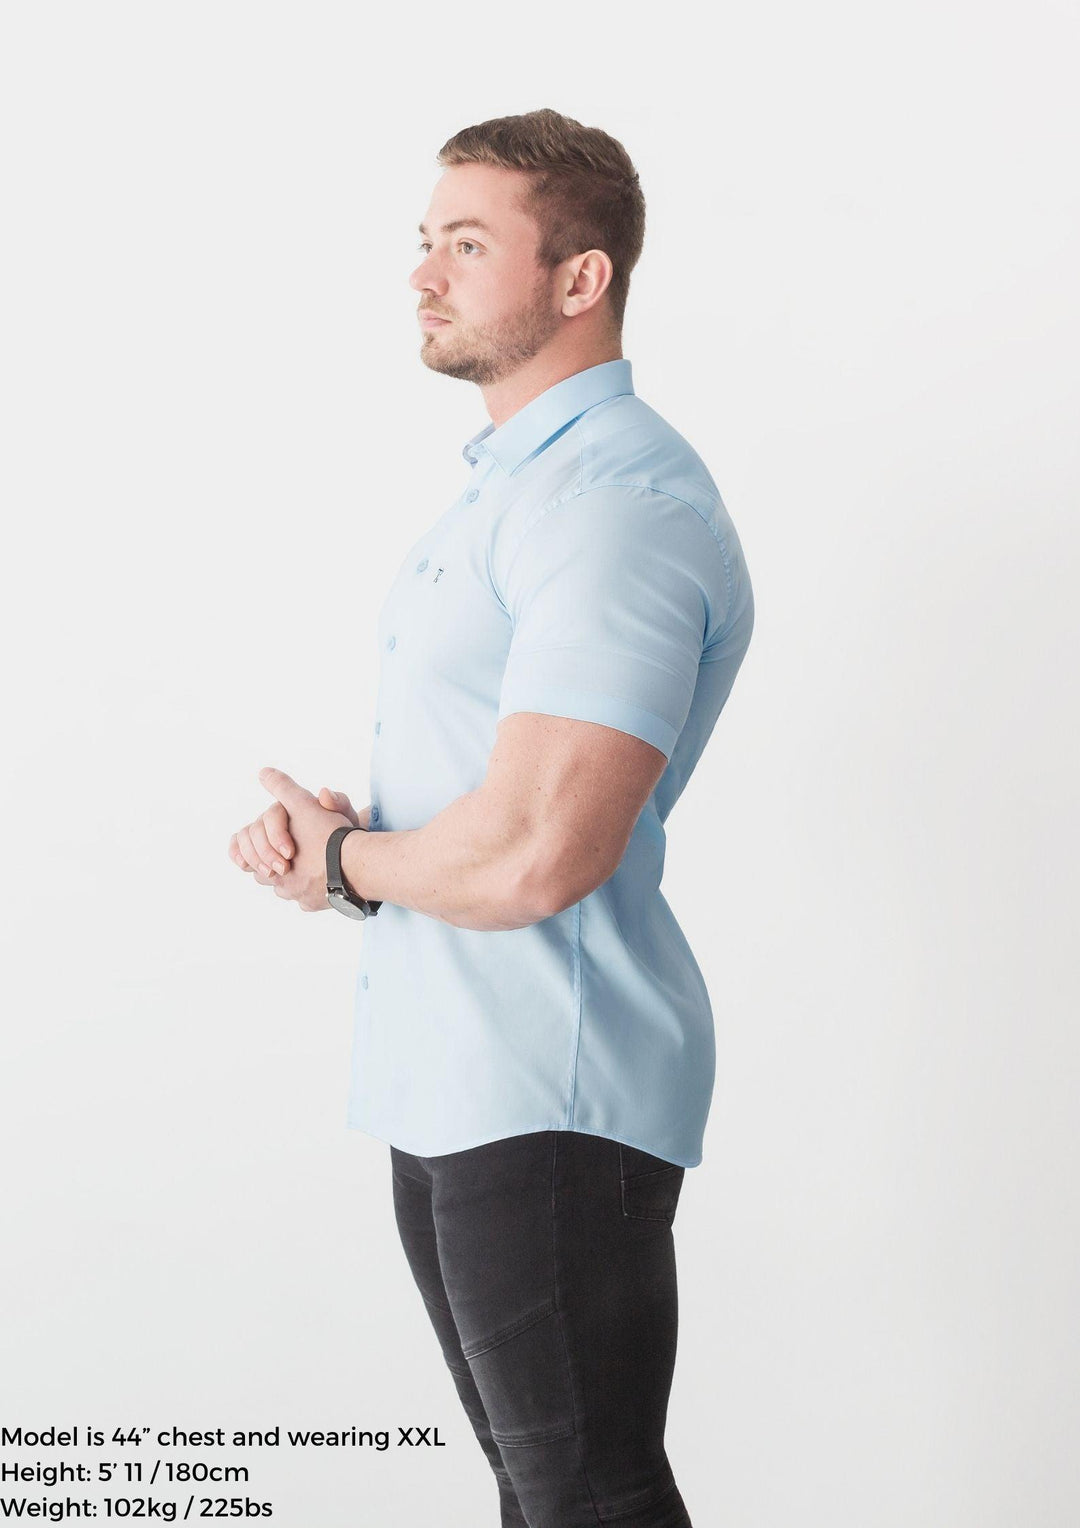 Blue Short Sleeve Tapered Fit Shirt Side. A Proportionally Fitted and Comfortable Short Sleeve Muscle Fit Shirt.